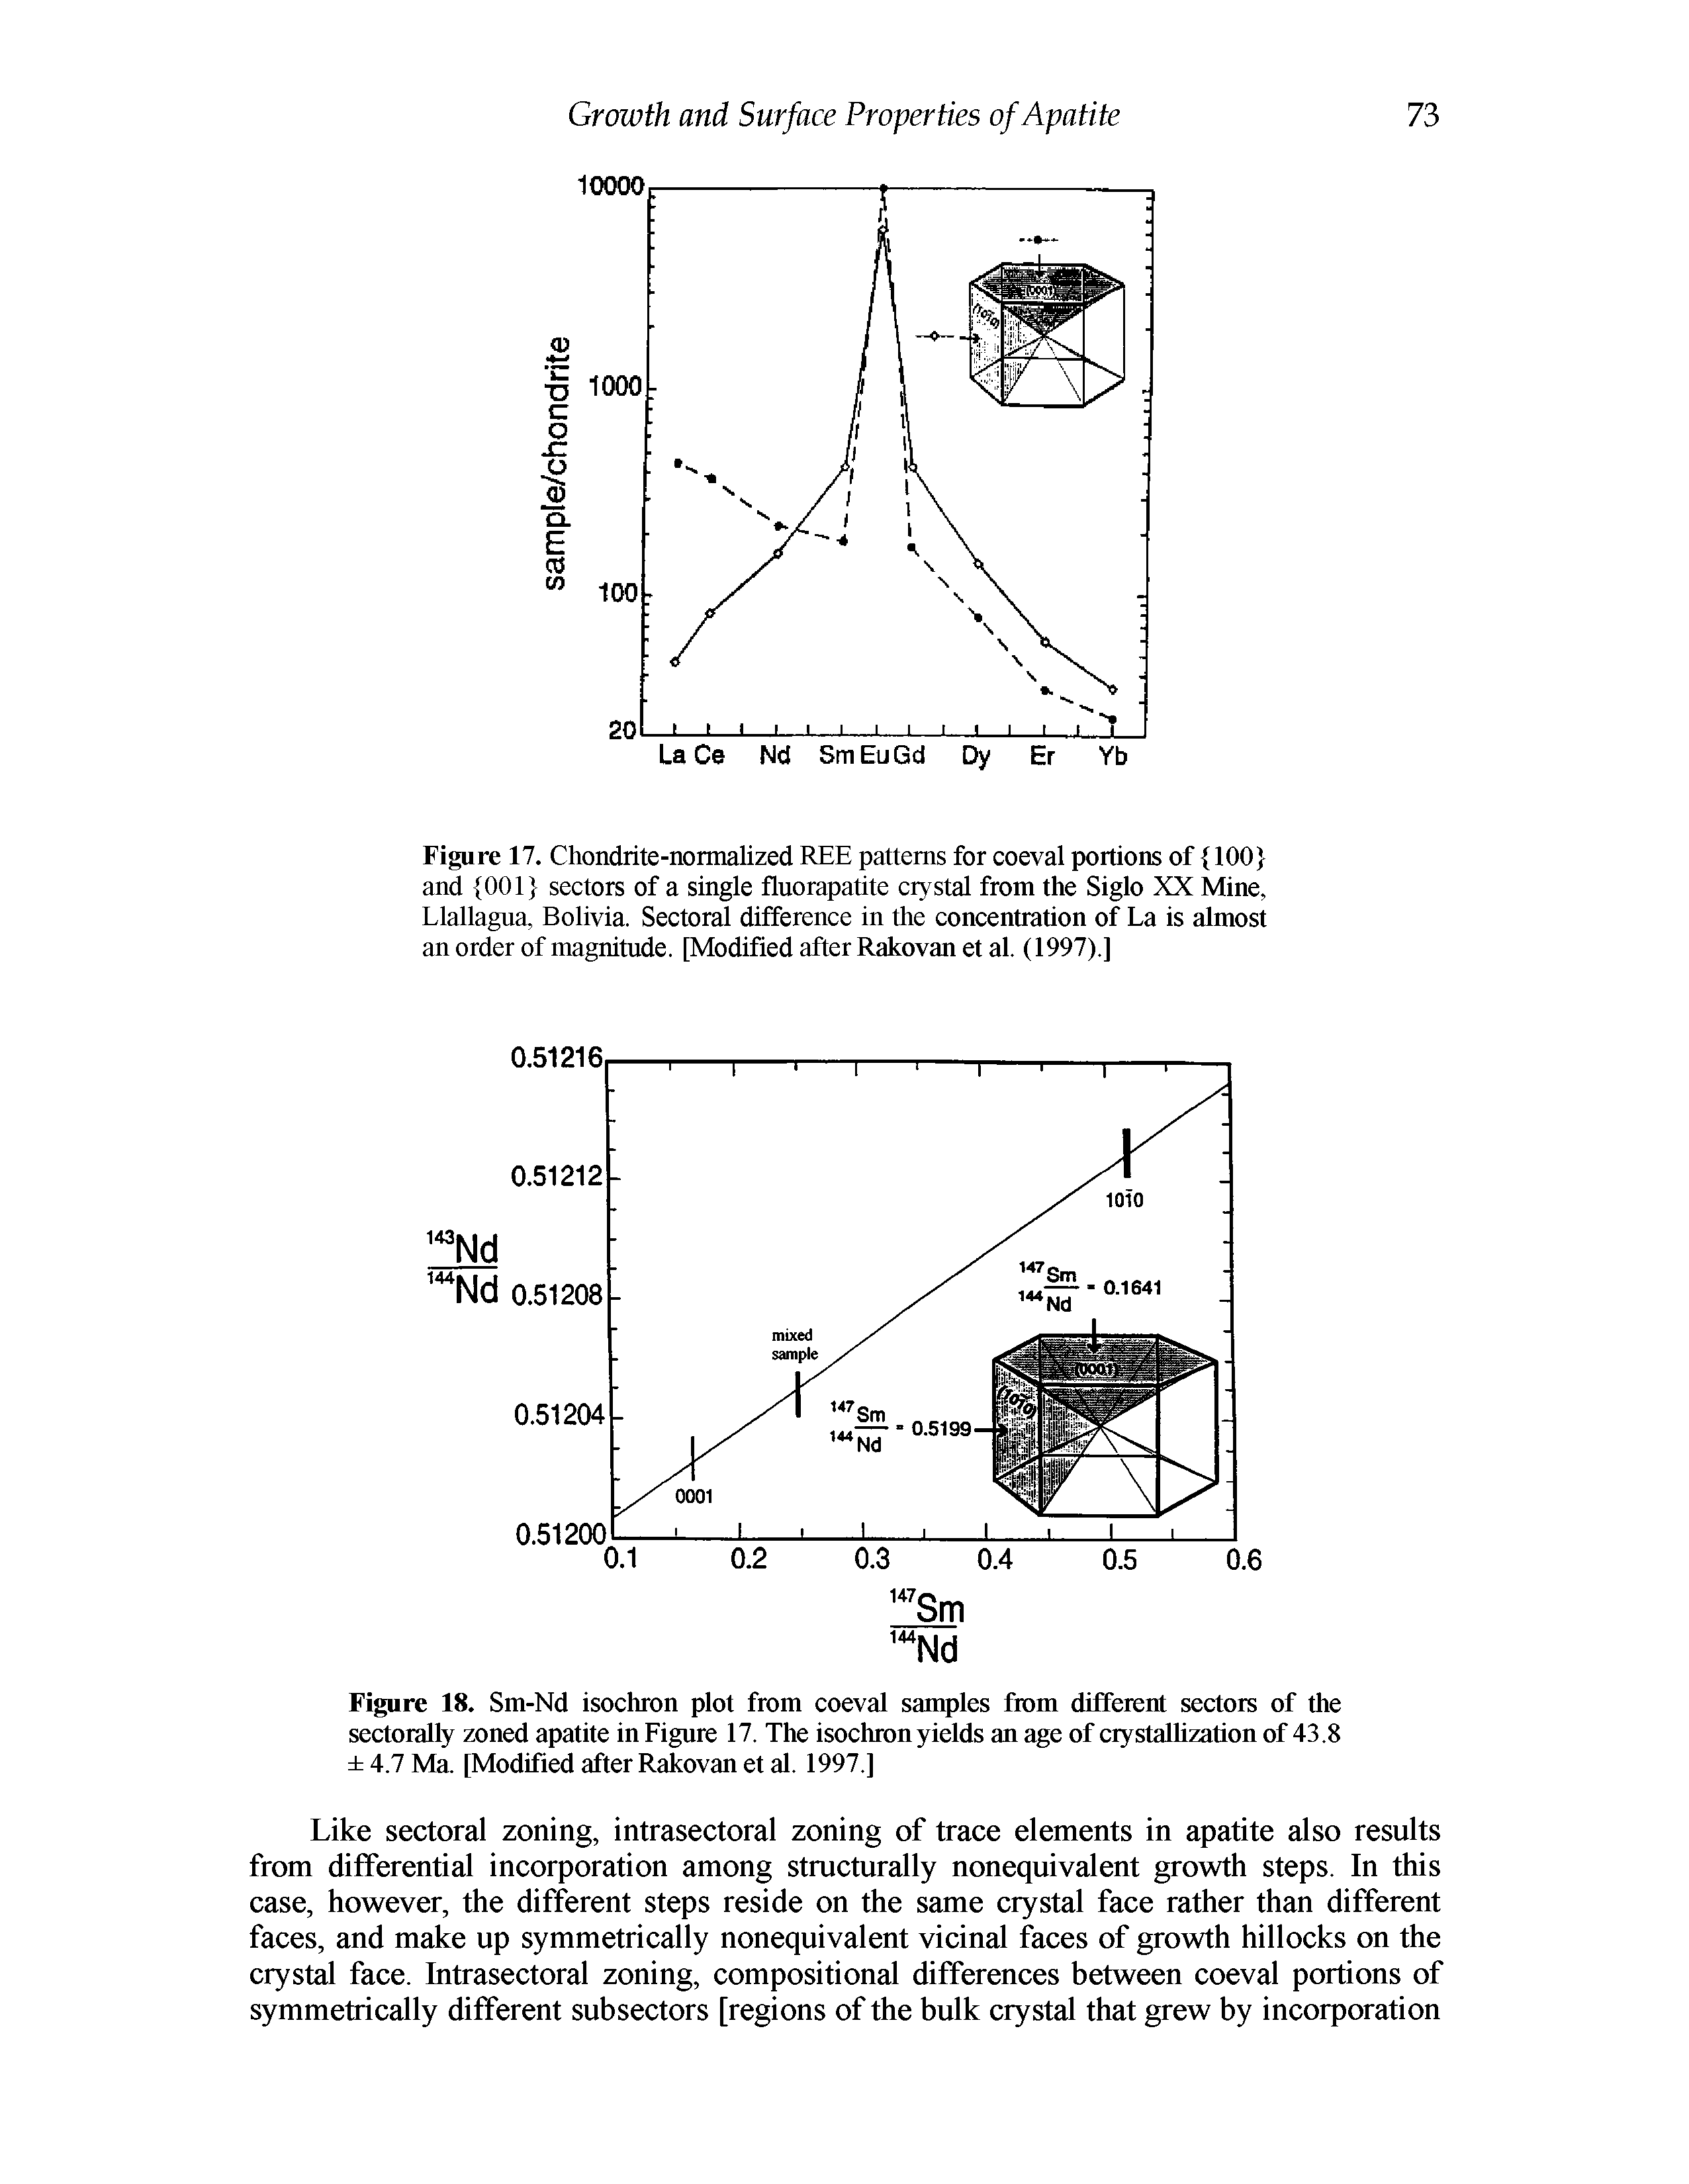 Figure 17. Chondrite-normalized REE patterns for coeval portions of 100 and 001 sectors of a single fluorapatite crystal from the Siglo XX Mine, Llallagna, Bolivia. Sectoral difference in the concentration of La is almost an order of magnitude. [Modified after Rakovan et al. (1997).]...